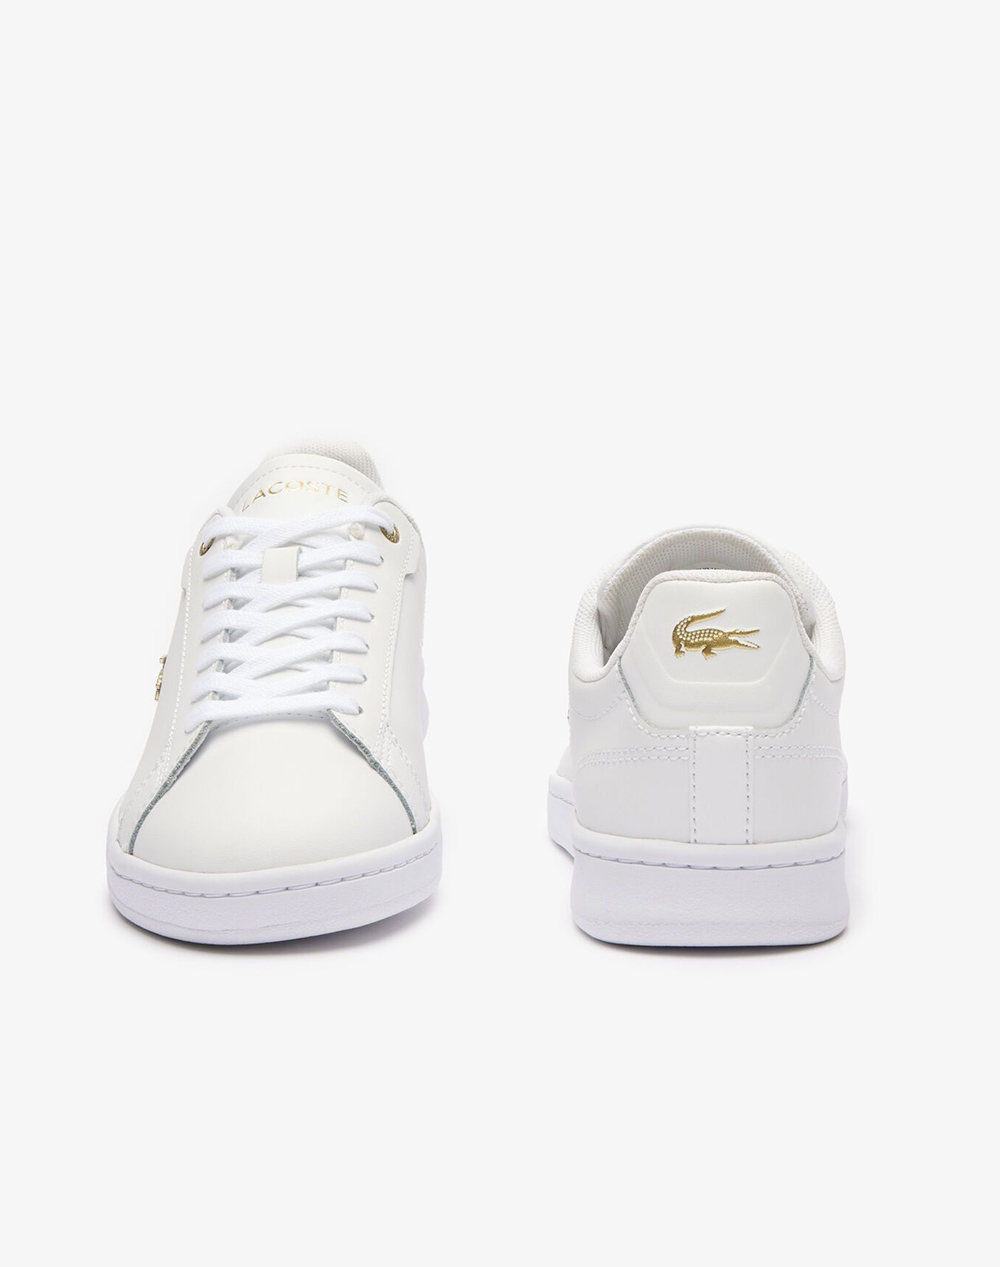 LACOSTE WOMENS SHOES CARNABY PRO 124 1 SFA CARNABY PRO 124 1 SFA